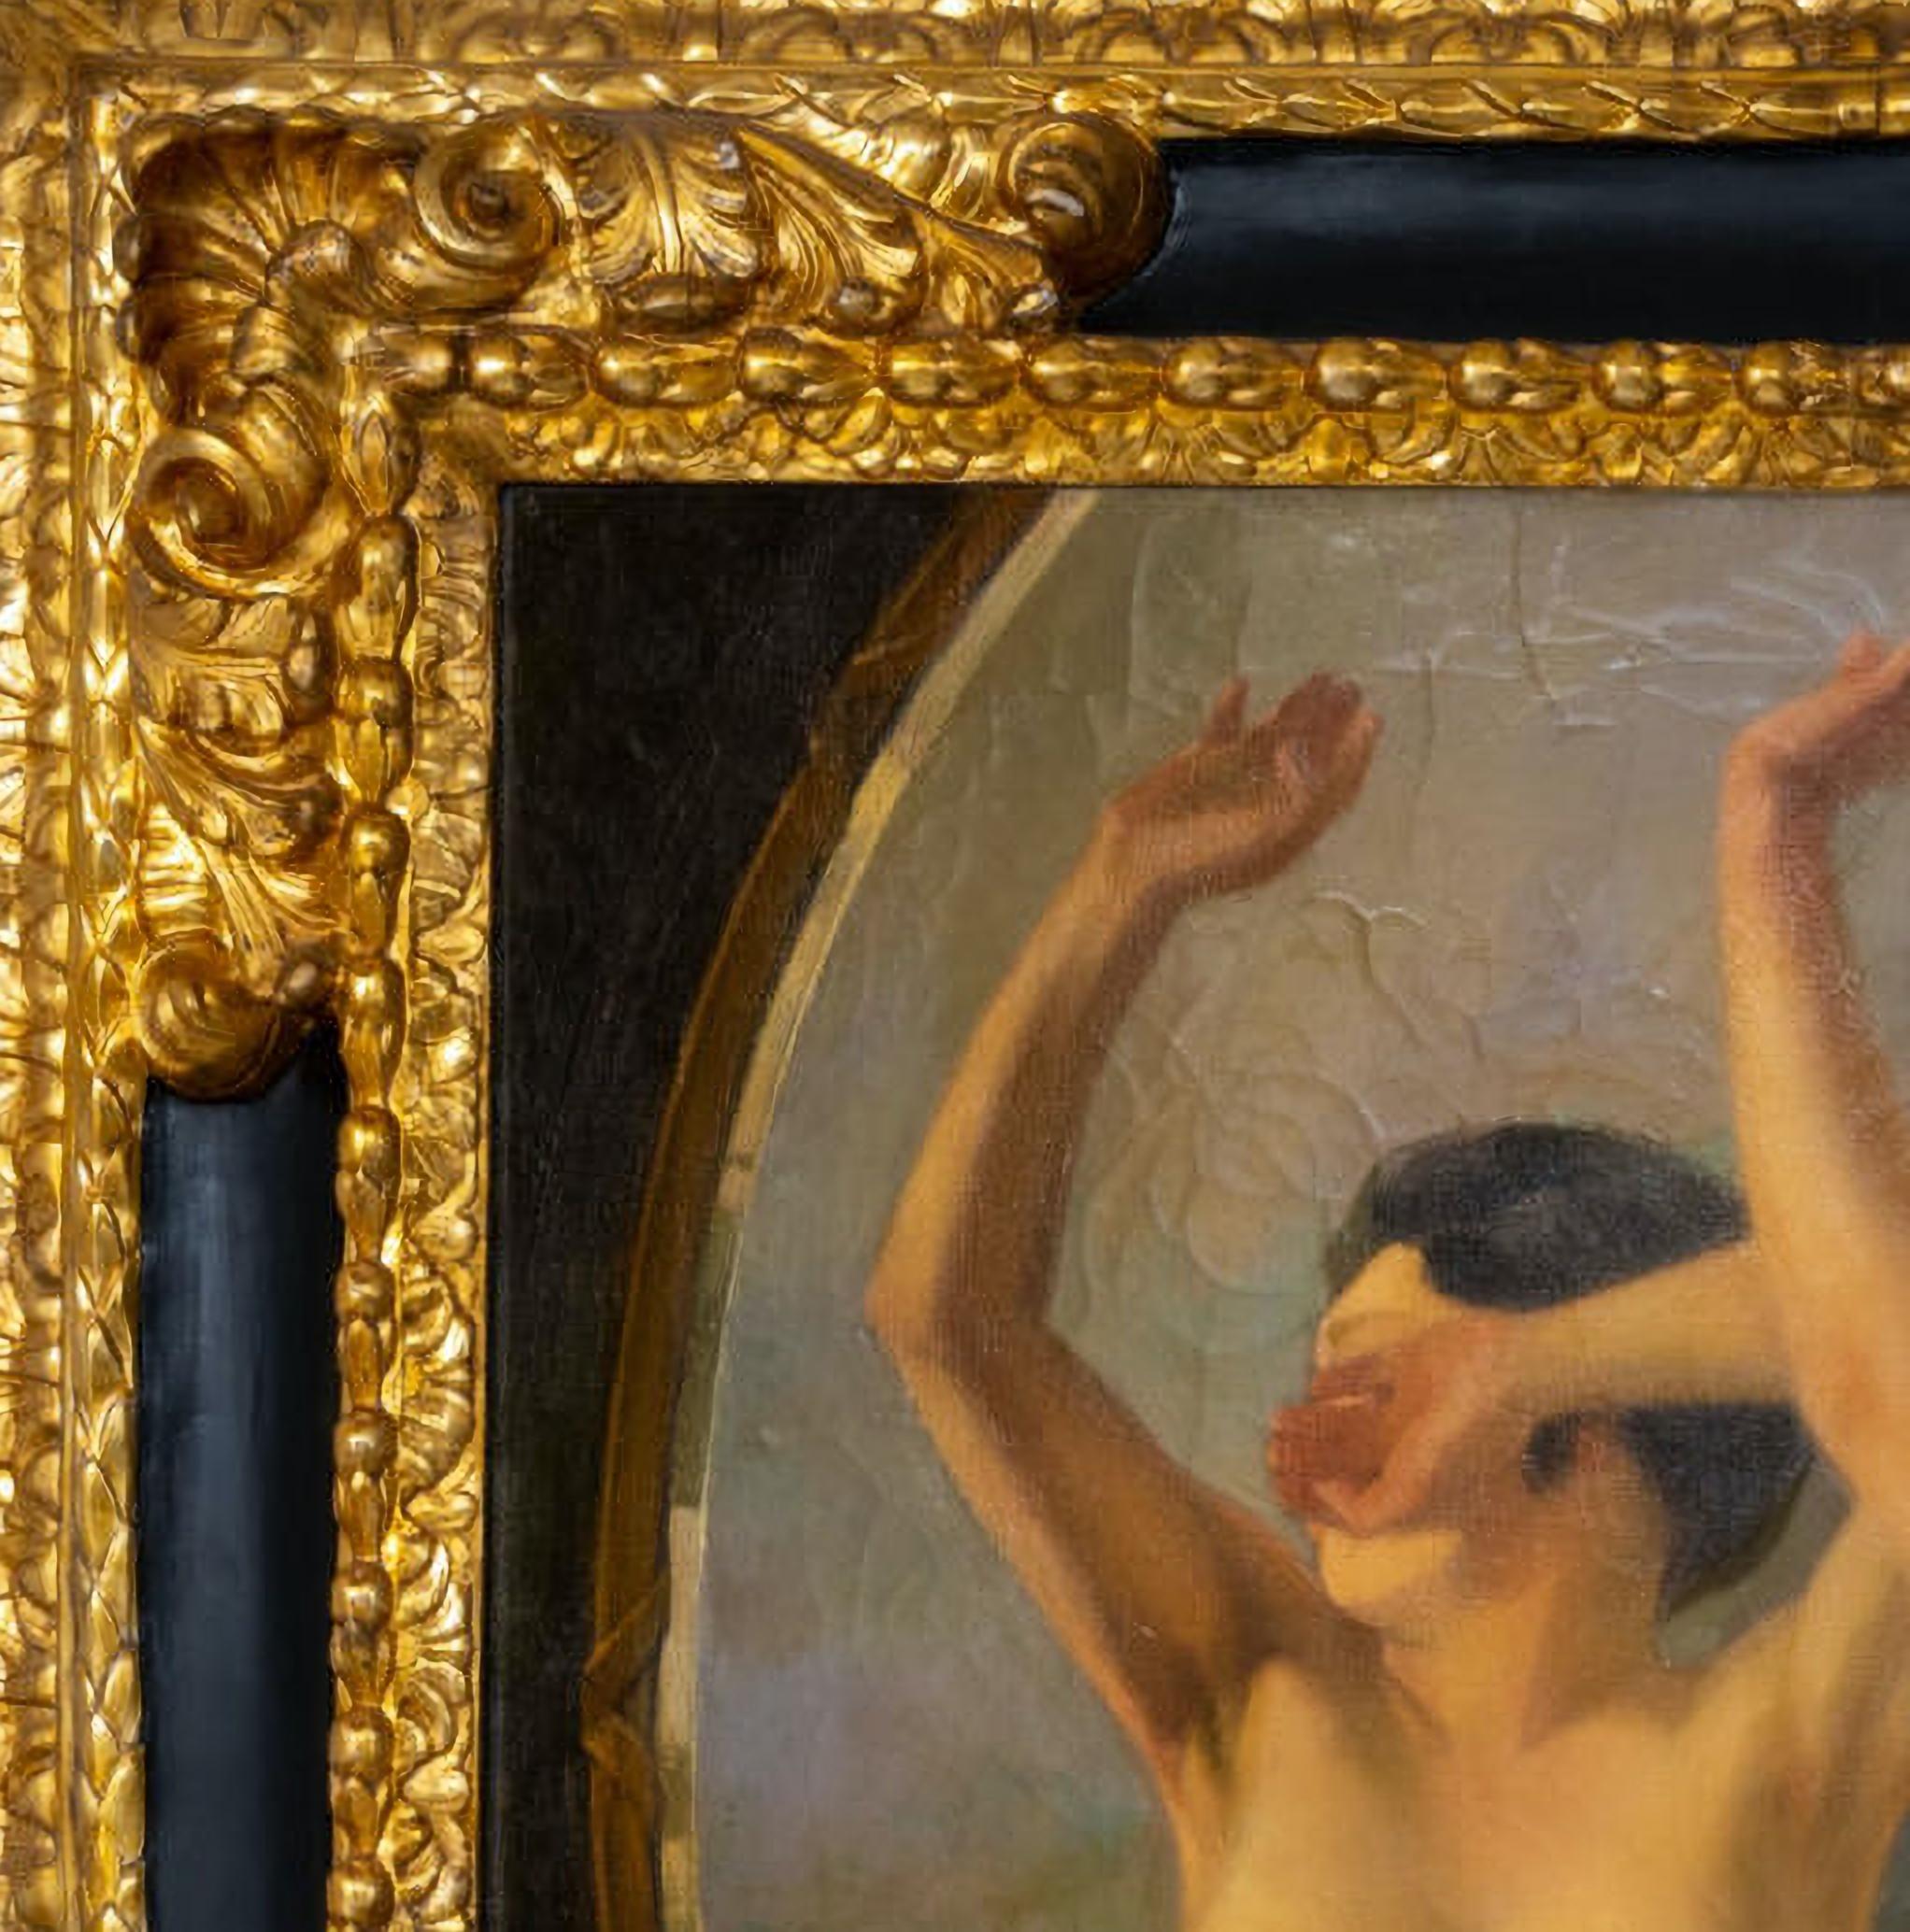 Italian school of the early 20th century
Nude woman in the mirror
Art Deco
Oil painting on canvas
Valuable wooden frame richly carved with black lacquer and pure gold.
The work is clearly inspired by the production of the Palermo master Aleardo